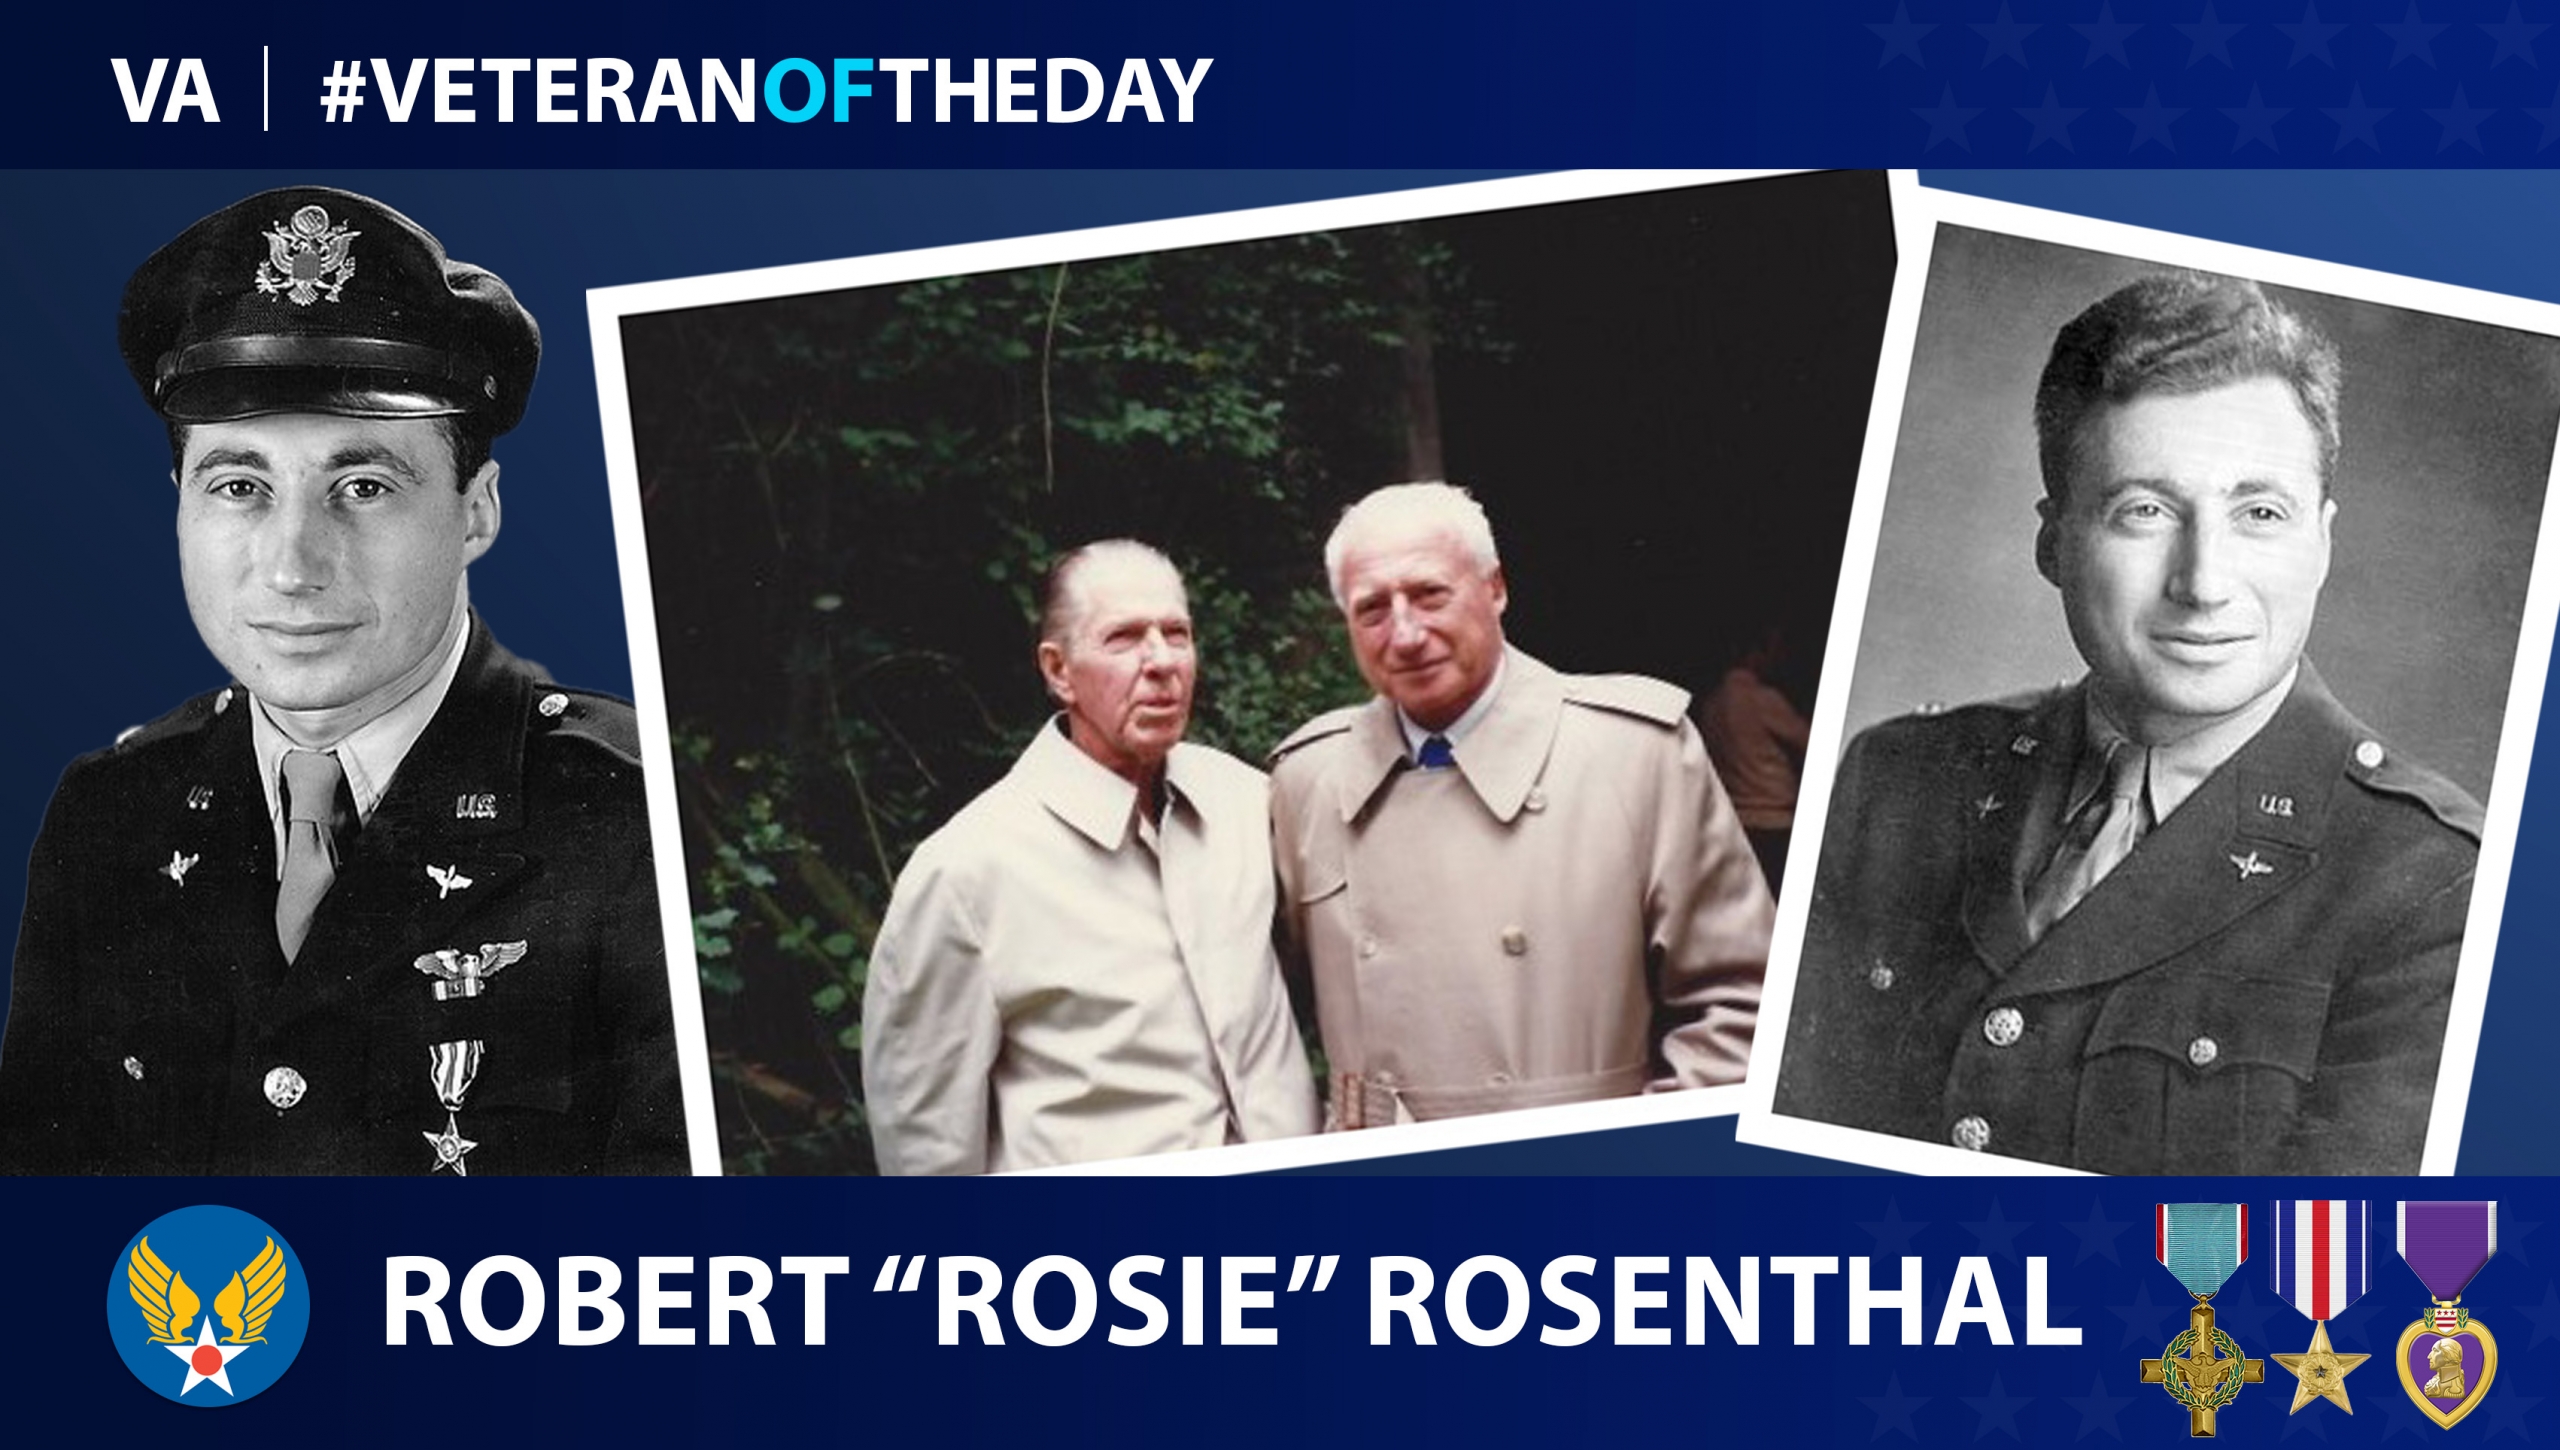 Army Air Forces Veteran Robert “Rosie” Rosenthal is today’s Veteran of the Day.